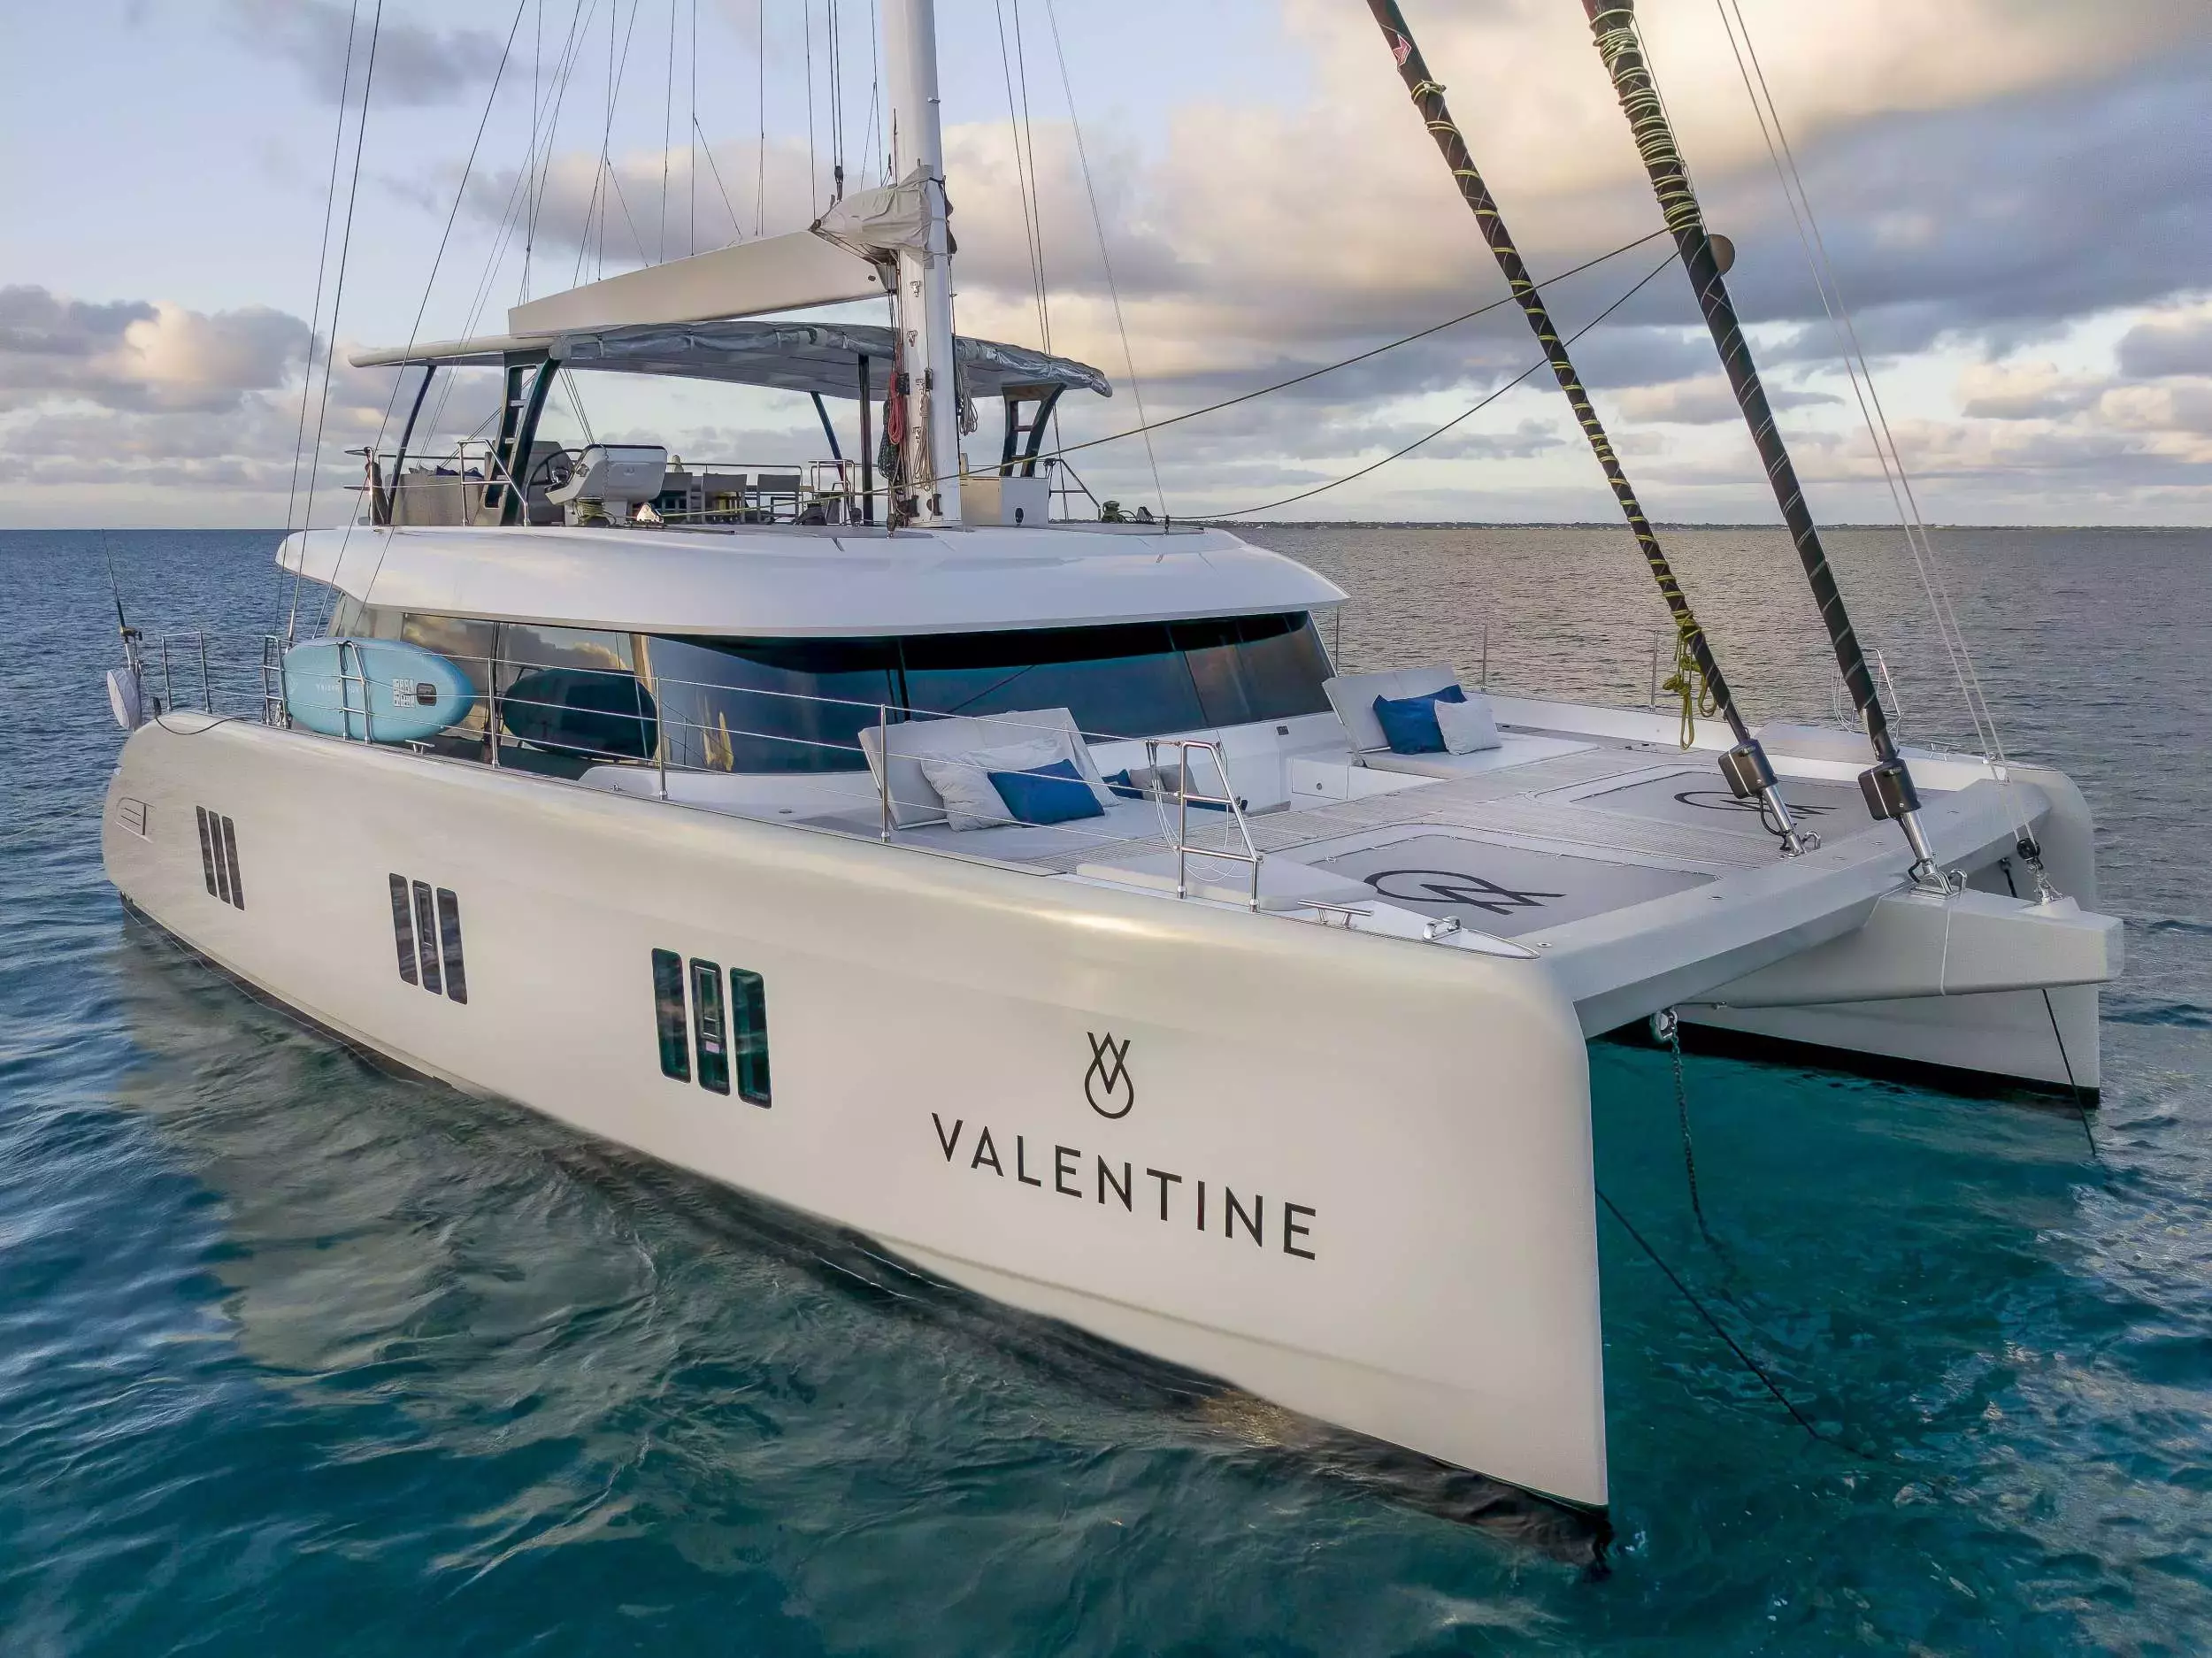 Valentine by Sunreef Yachts - Top rates for a Rental of a private Power Catamaran in British Virgin Islands